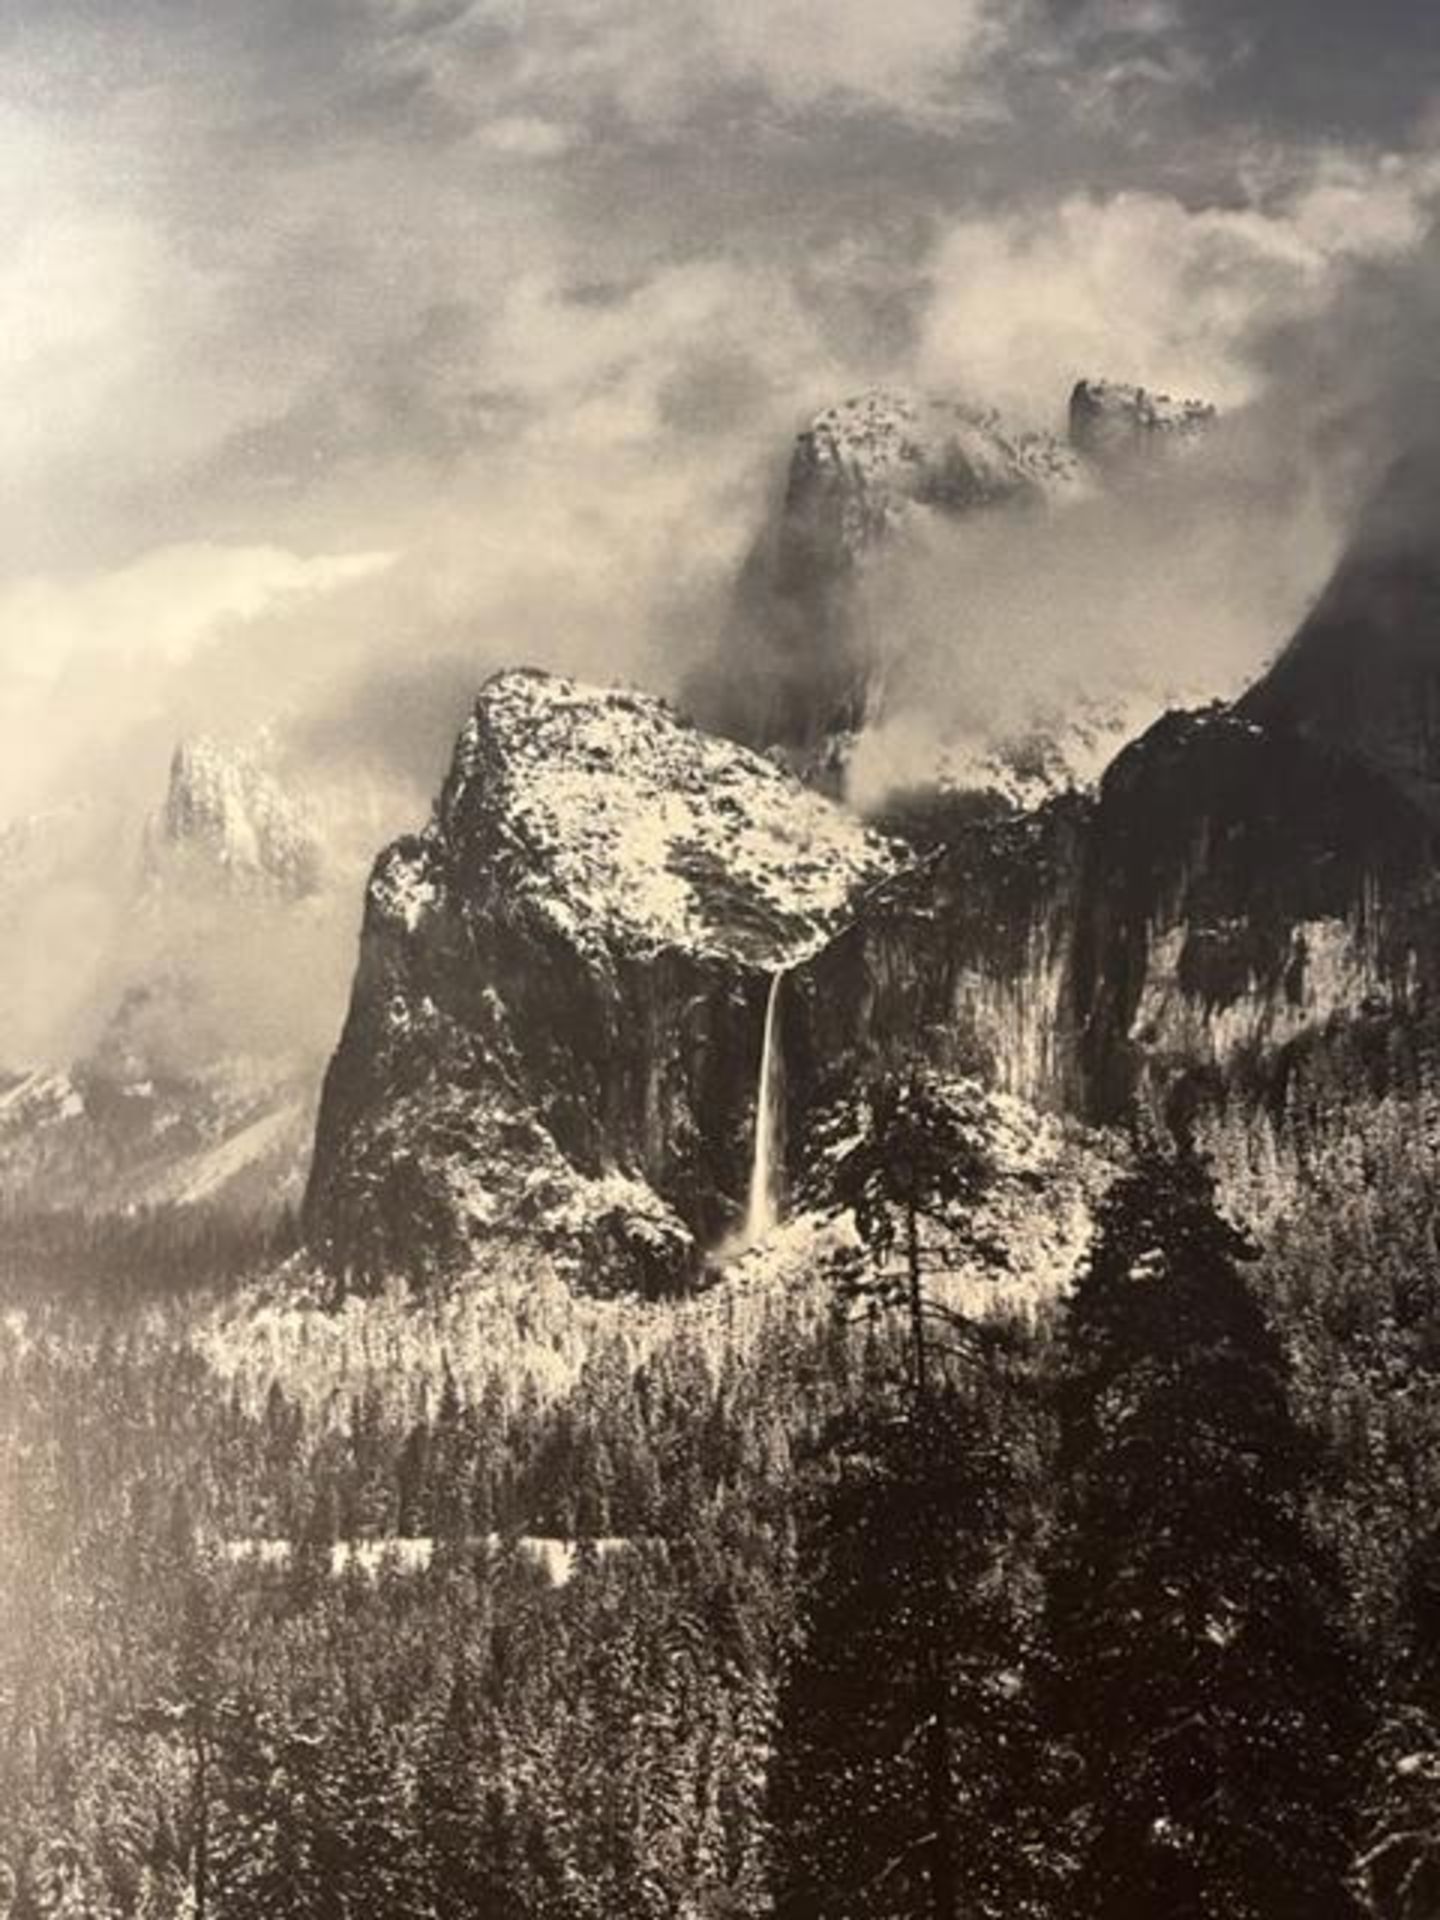 Ansel Adams "Clearing Winter Storm" Print. - Image 2 of 6